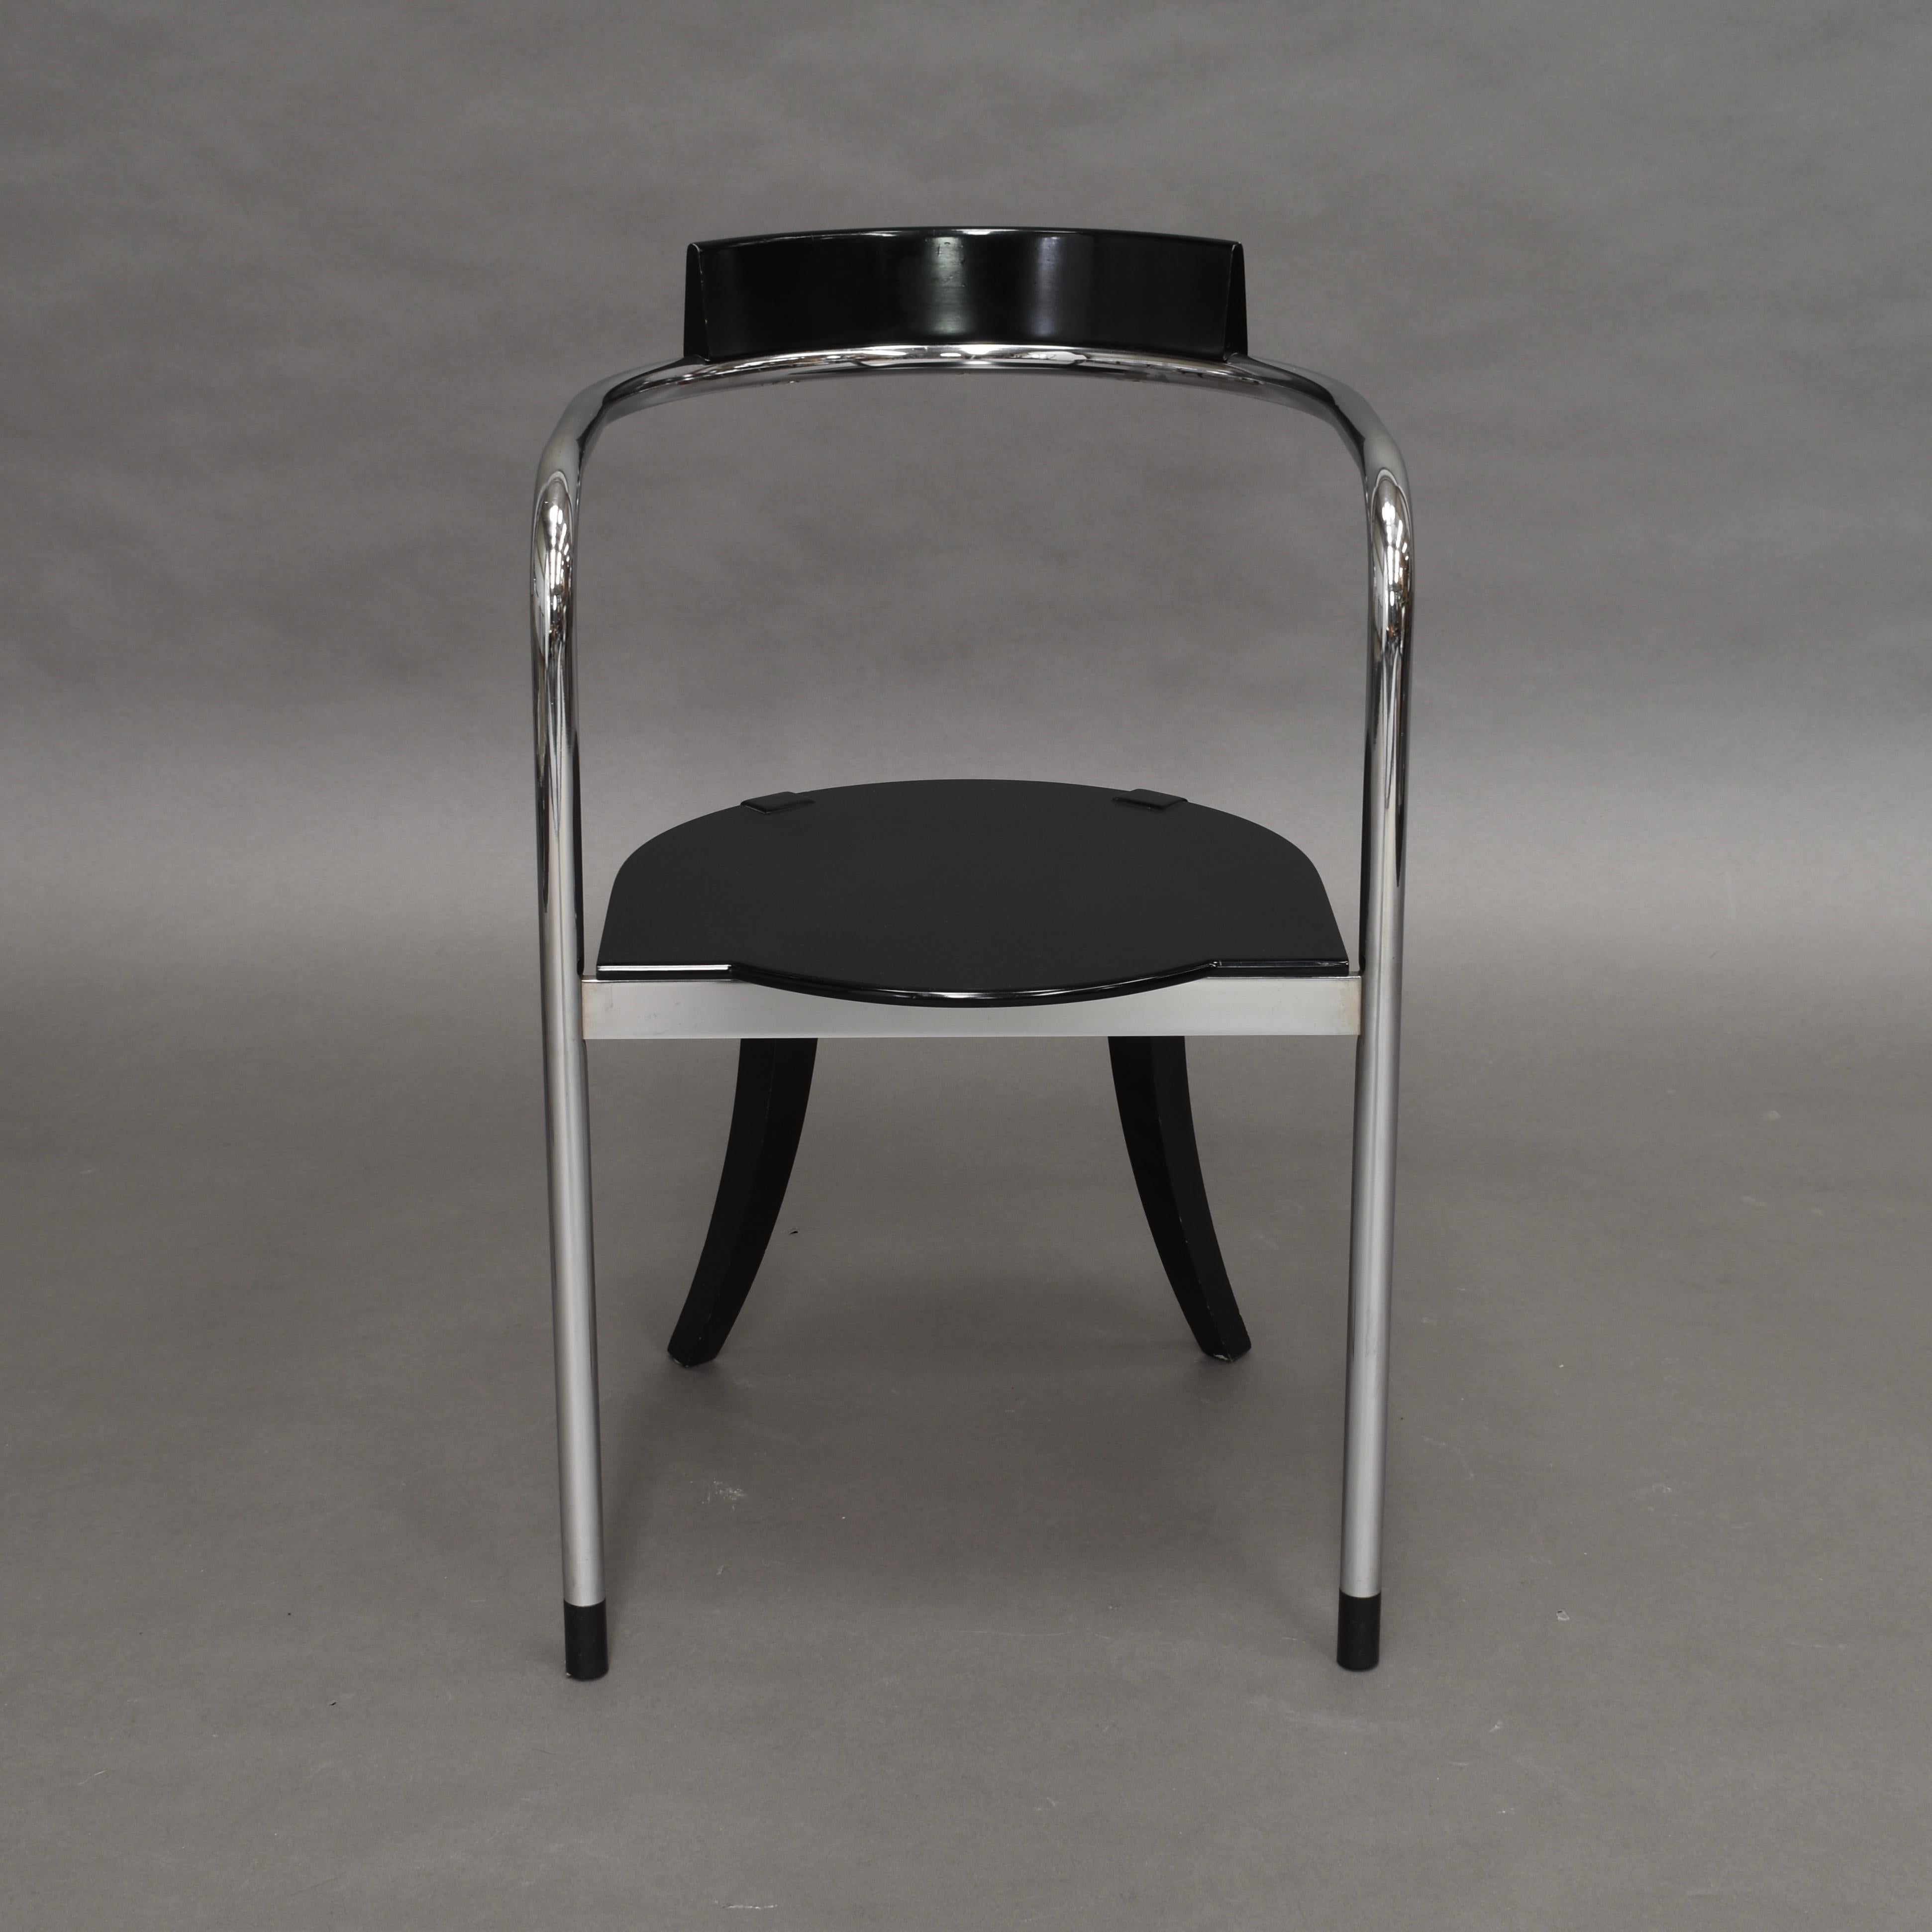 Pair of Chrome Dining Armchairs by David Palterer for Zanotta, Italy, 1987 For Sale 3